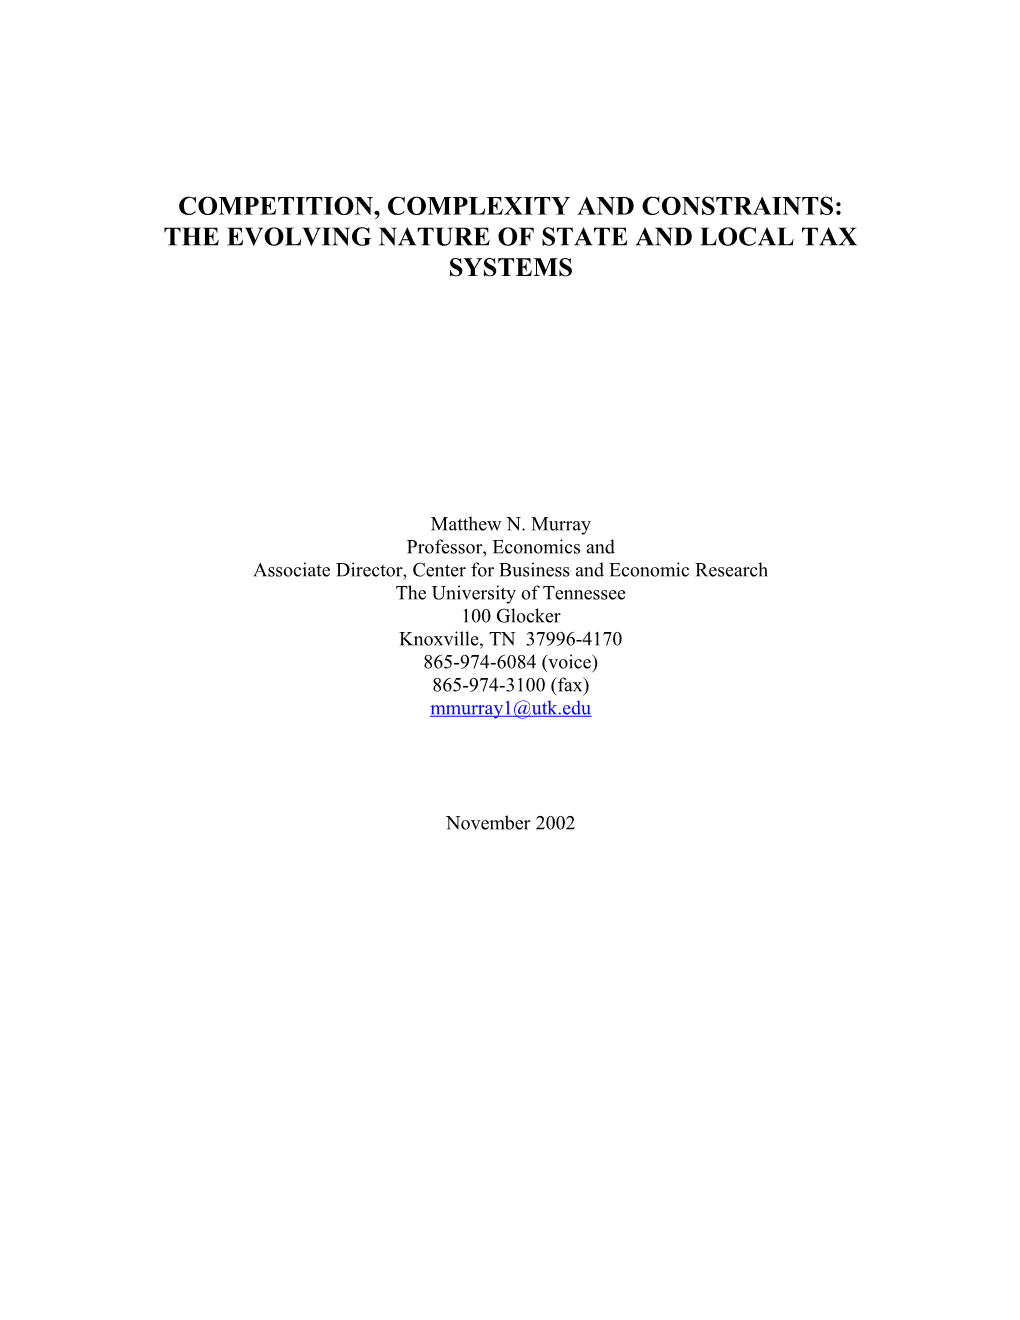 Competition, Complexity and Constraints